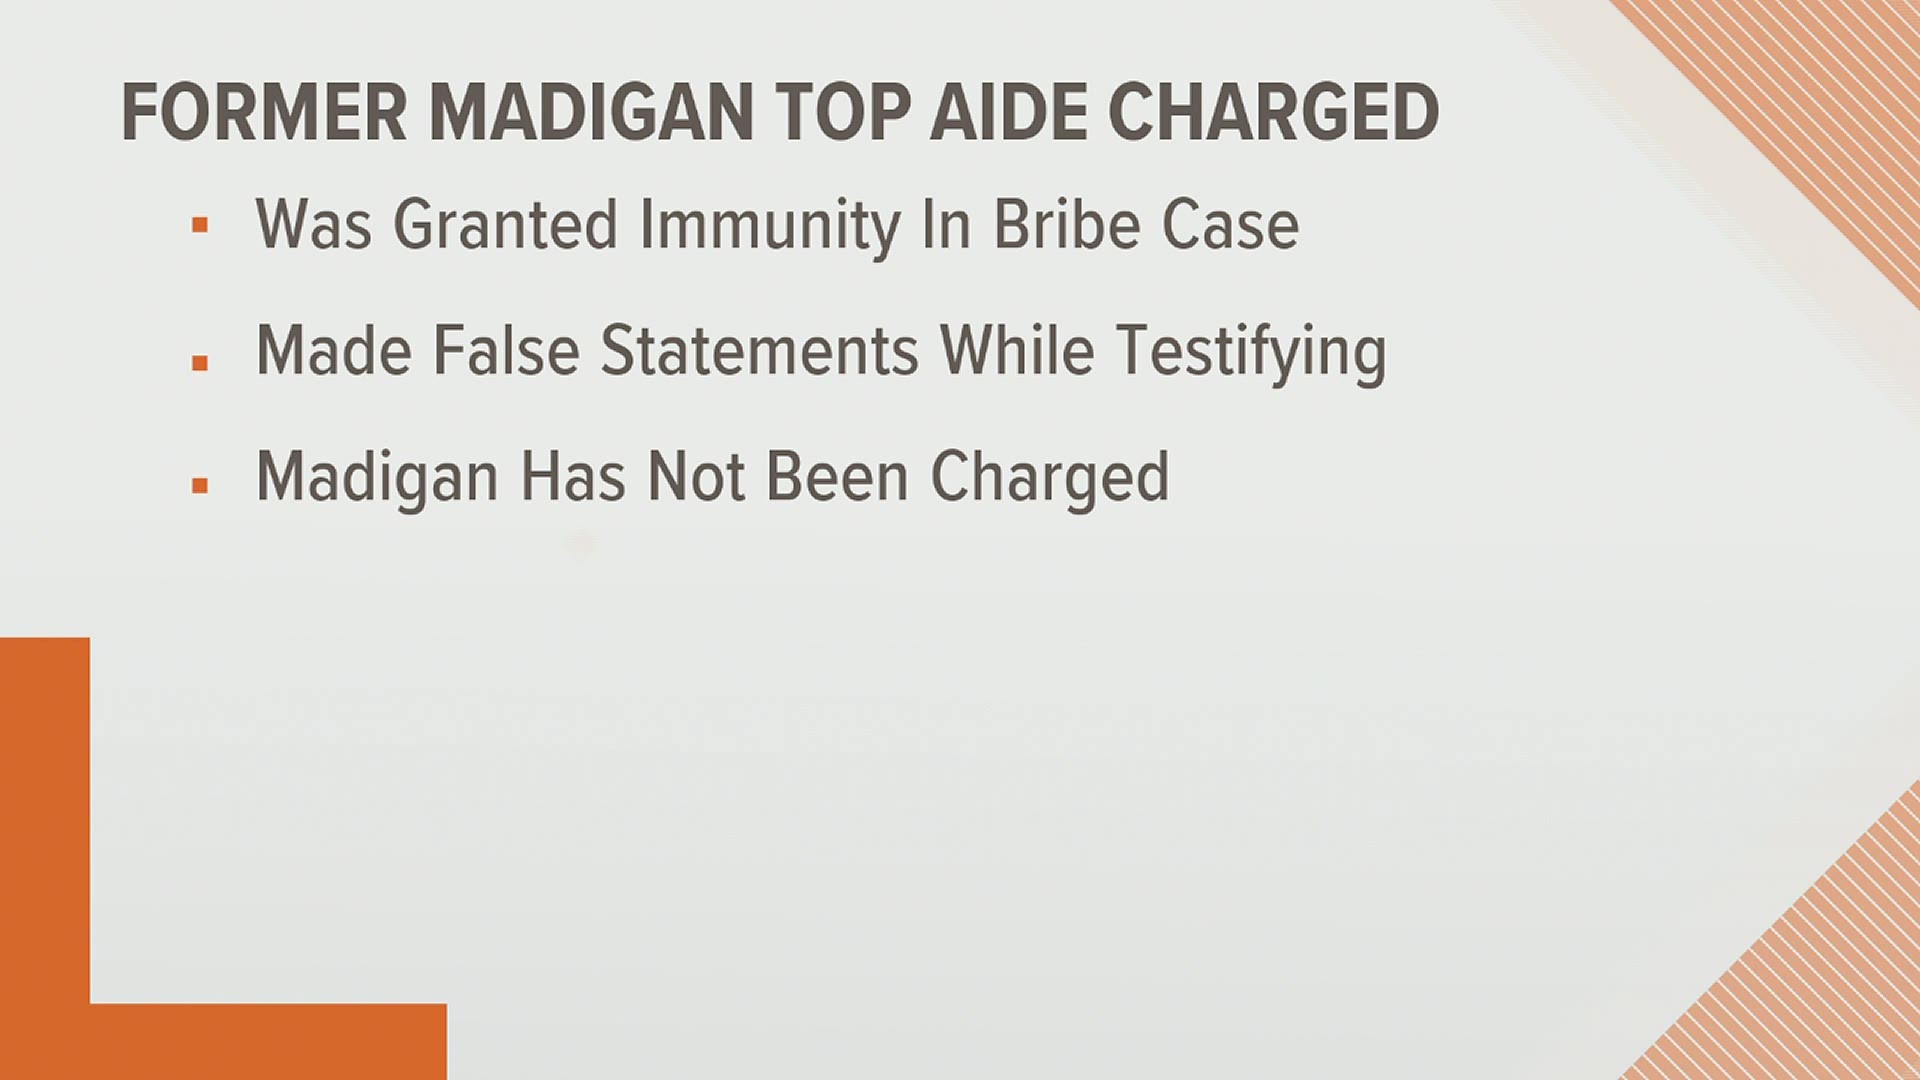 Mike Madigan has not been charged with any crime.